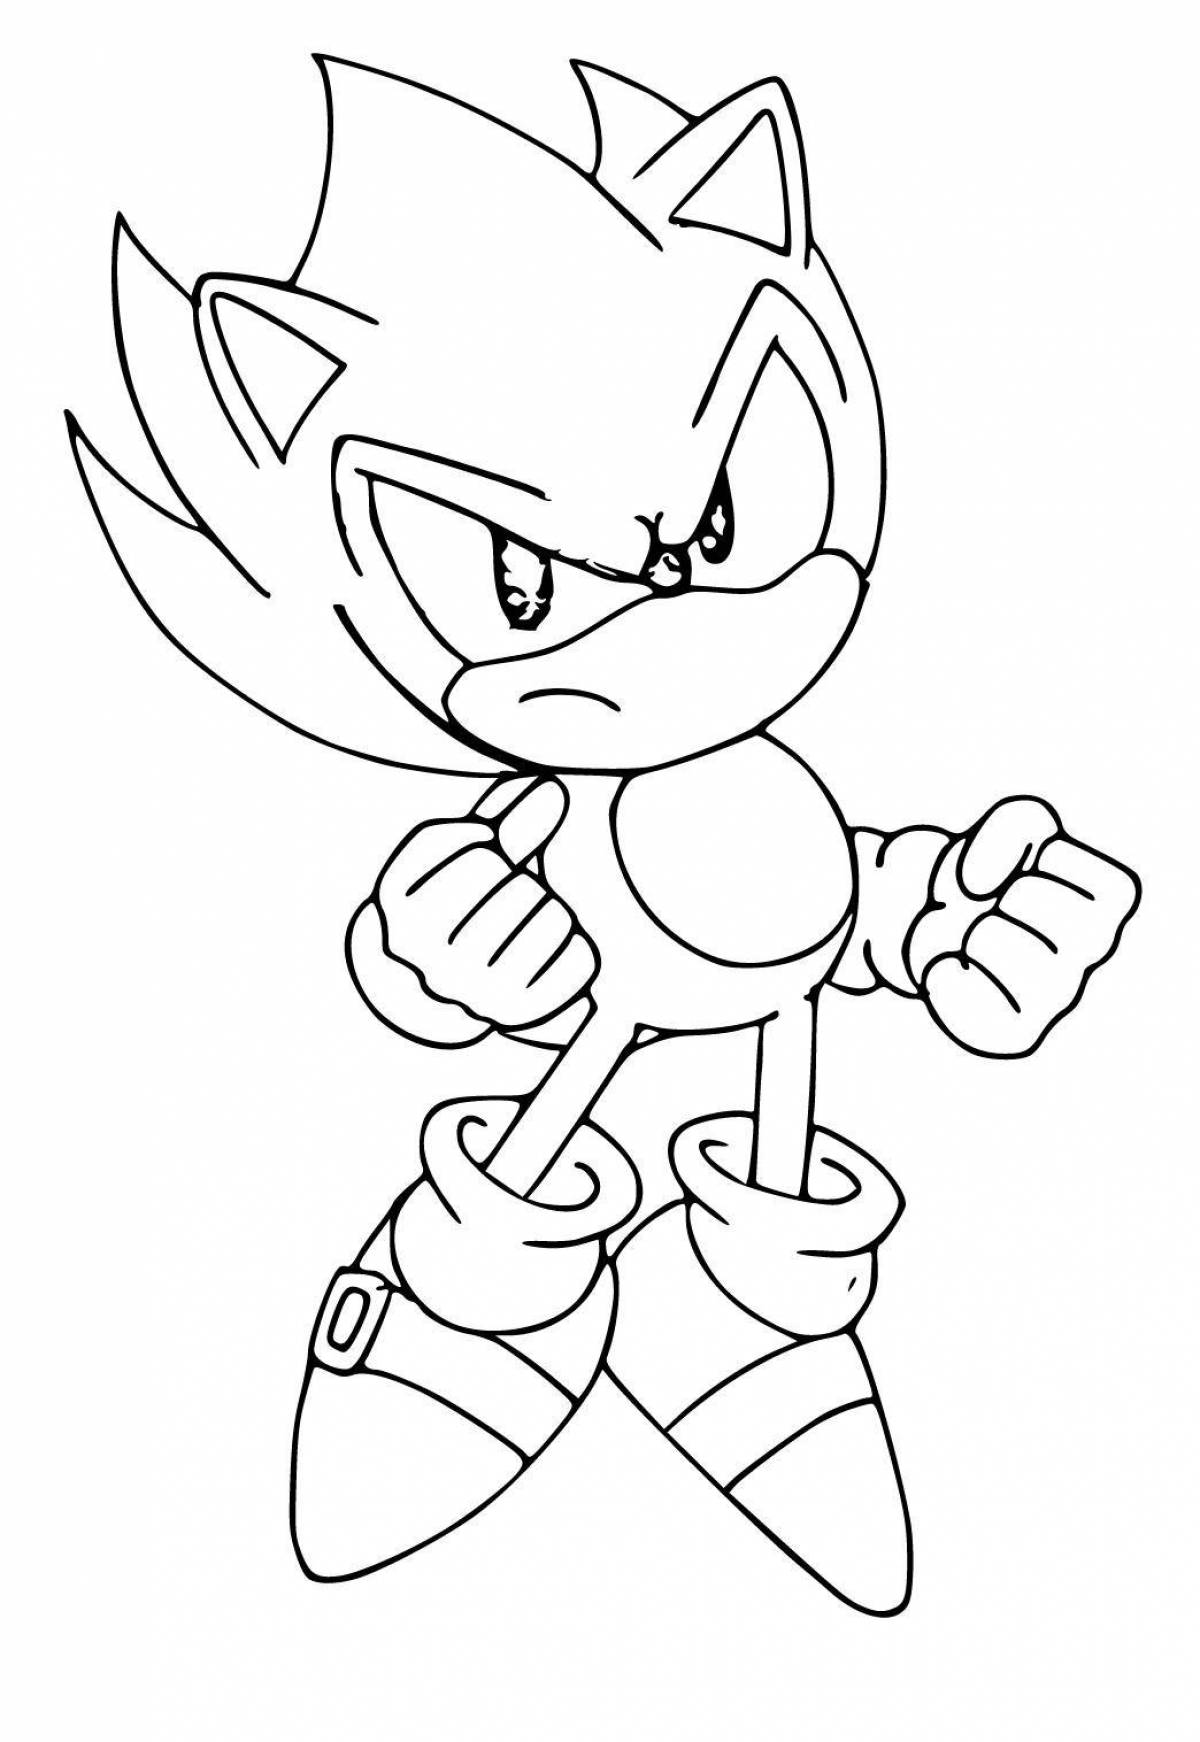 Playful sonic force coloring book